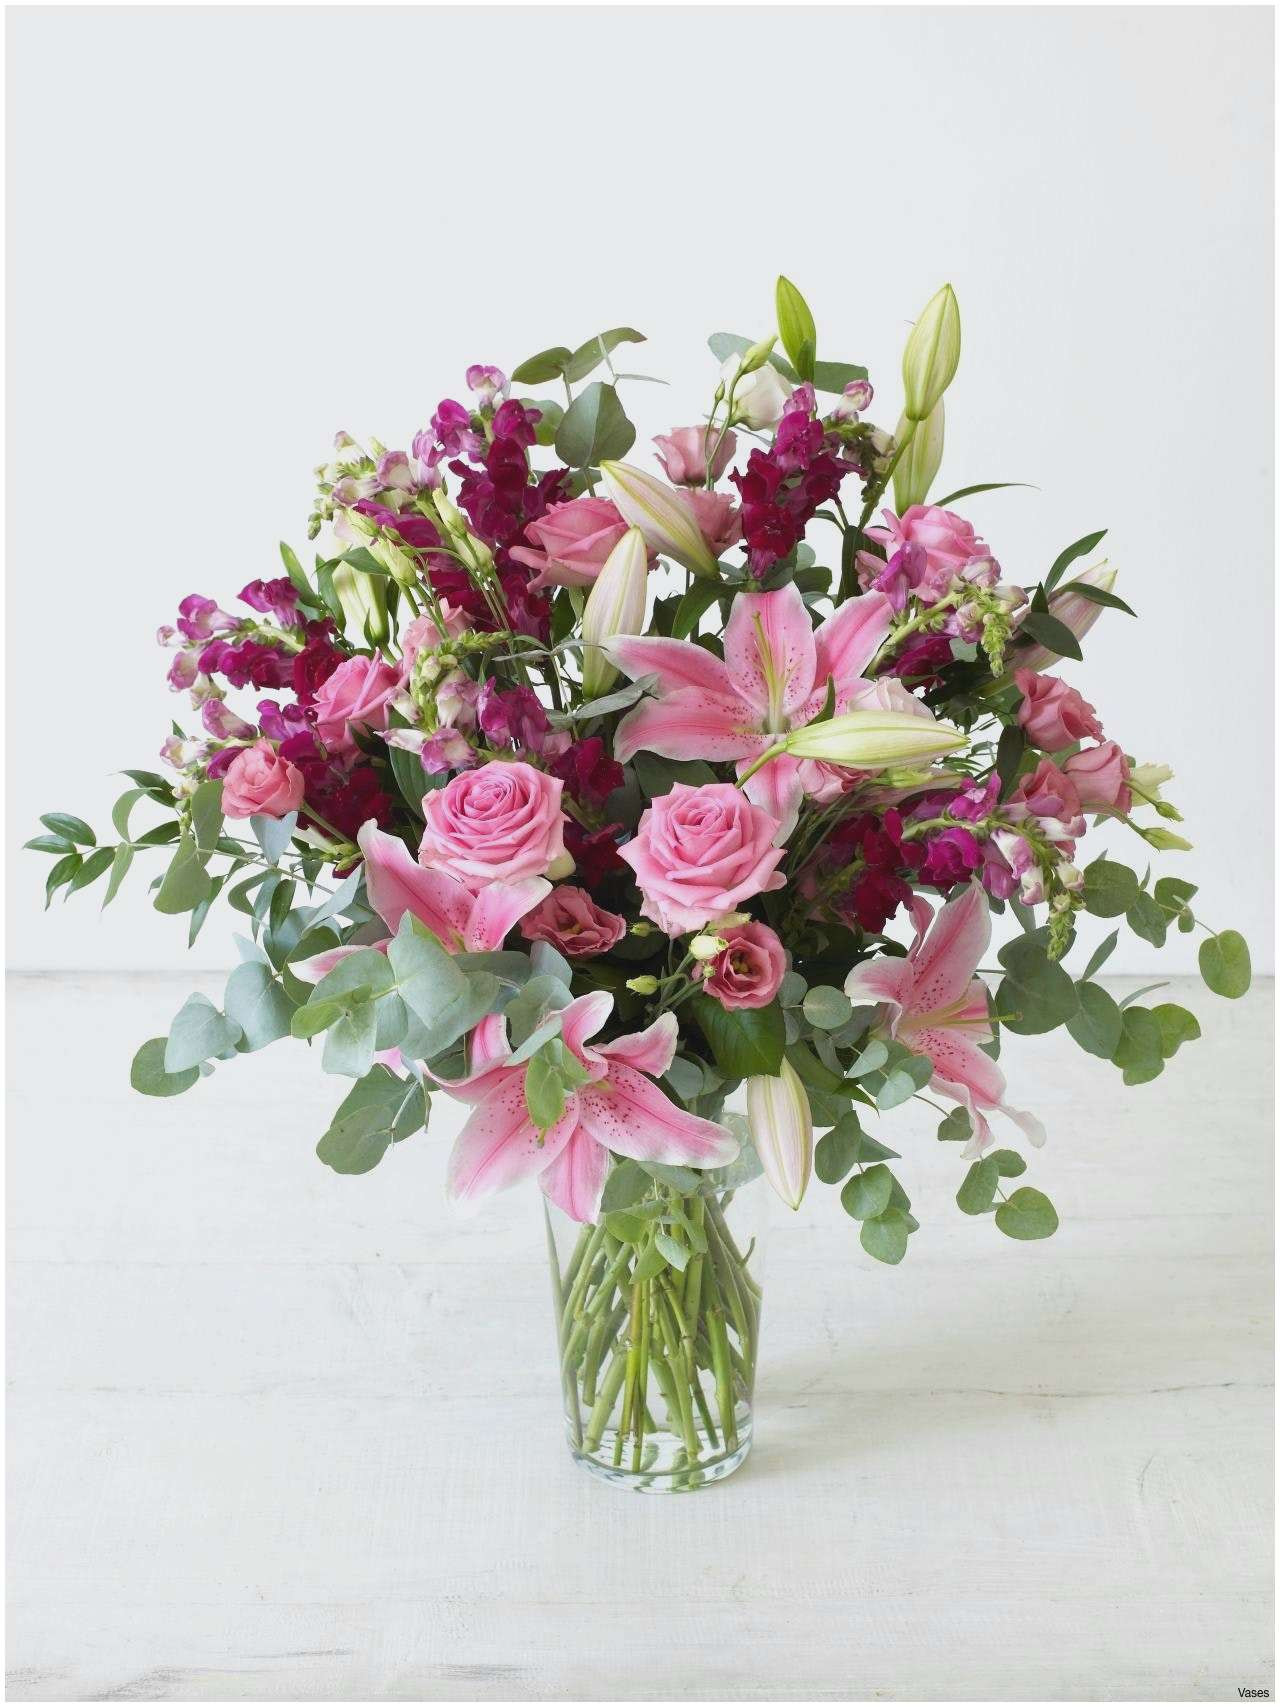 rustic flower vase ideas of how to decorate a flower garden picking out flower arrangements for how to decorate a flower garden picking out flower arrangements elegant floral arrangements 0d design ideas